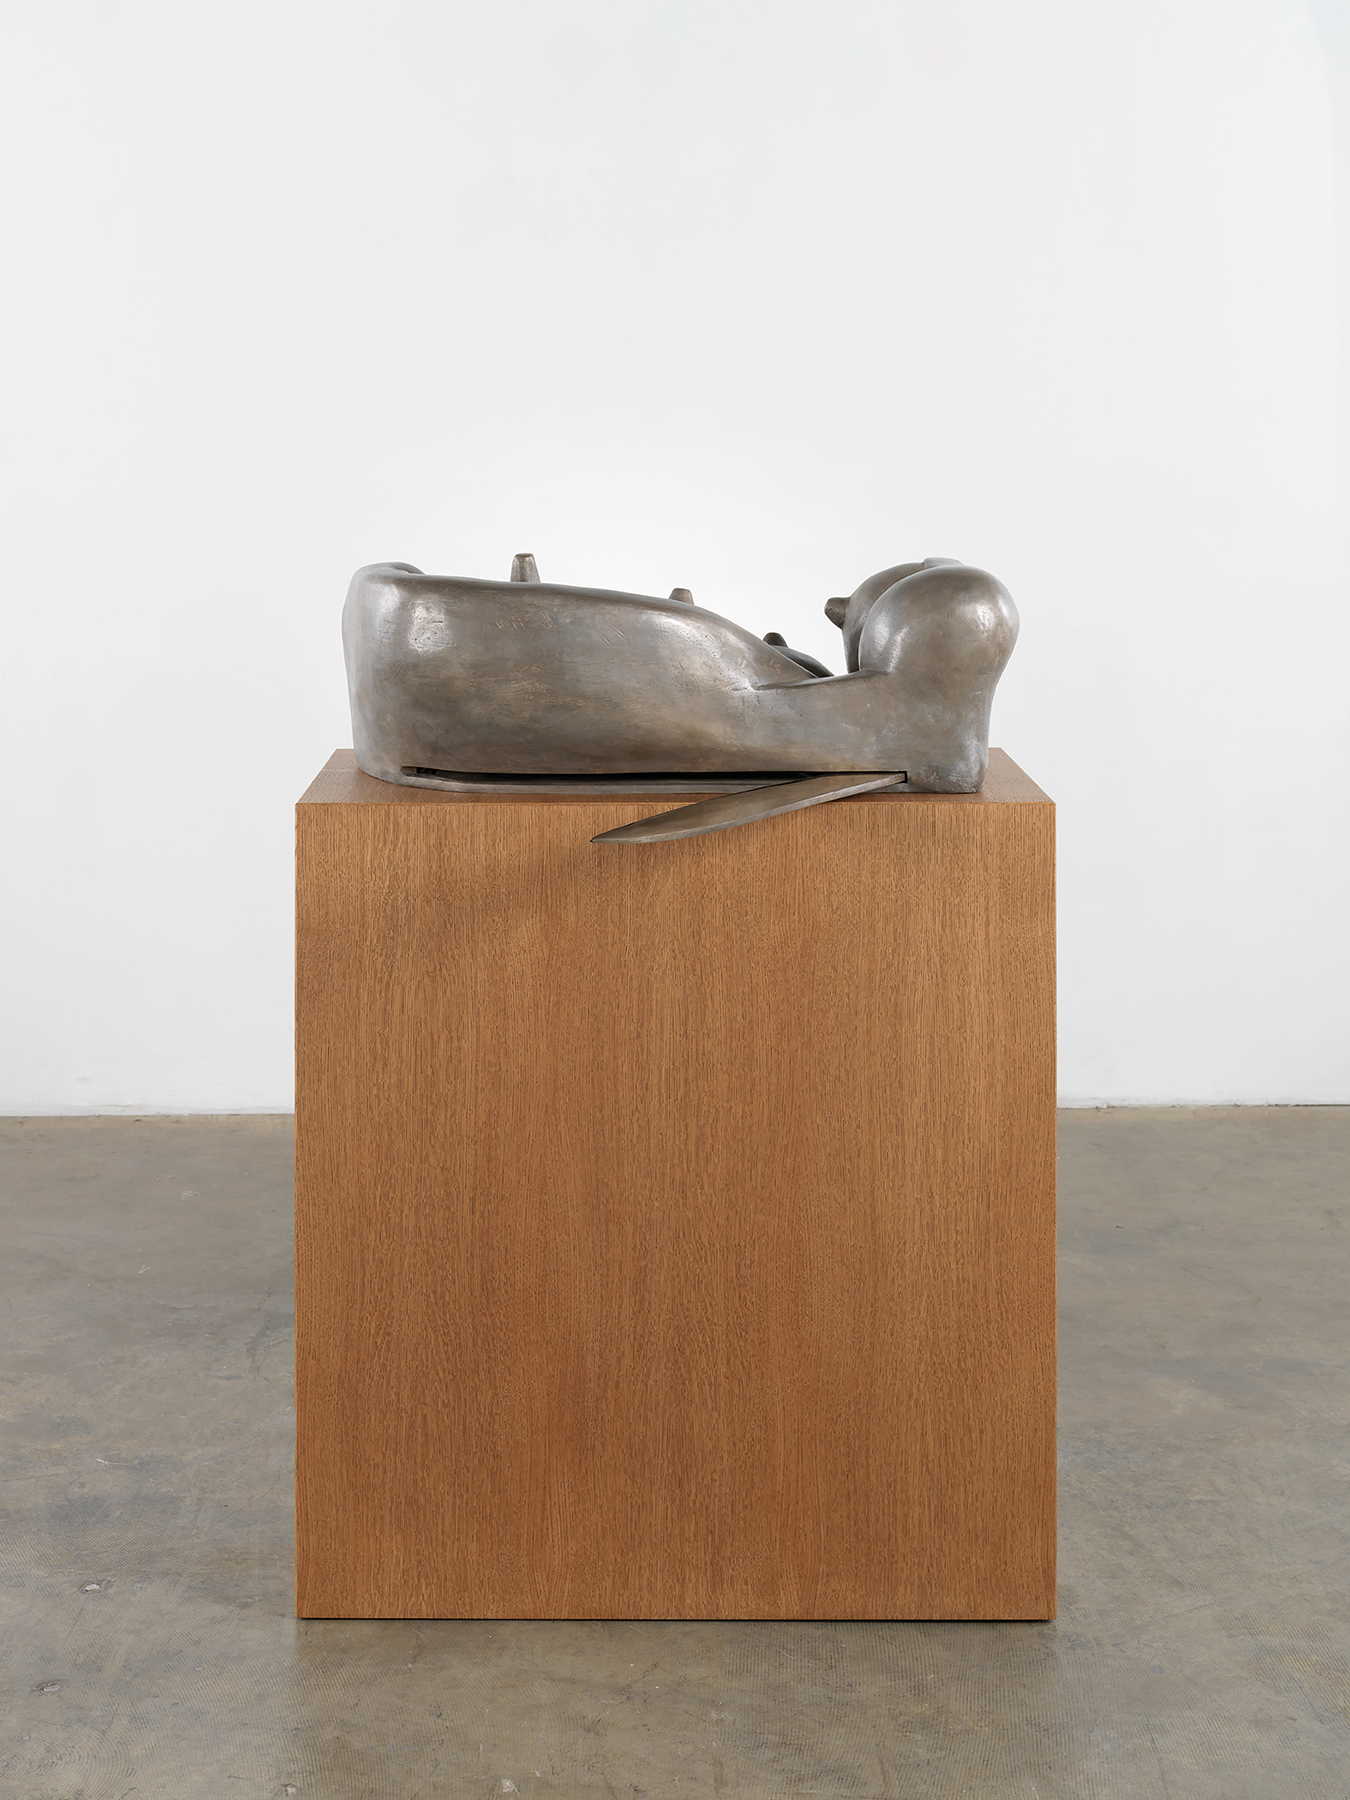 Installation view of Louise Bourgeois's bronze sculpture Breasts and Blade